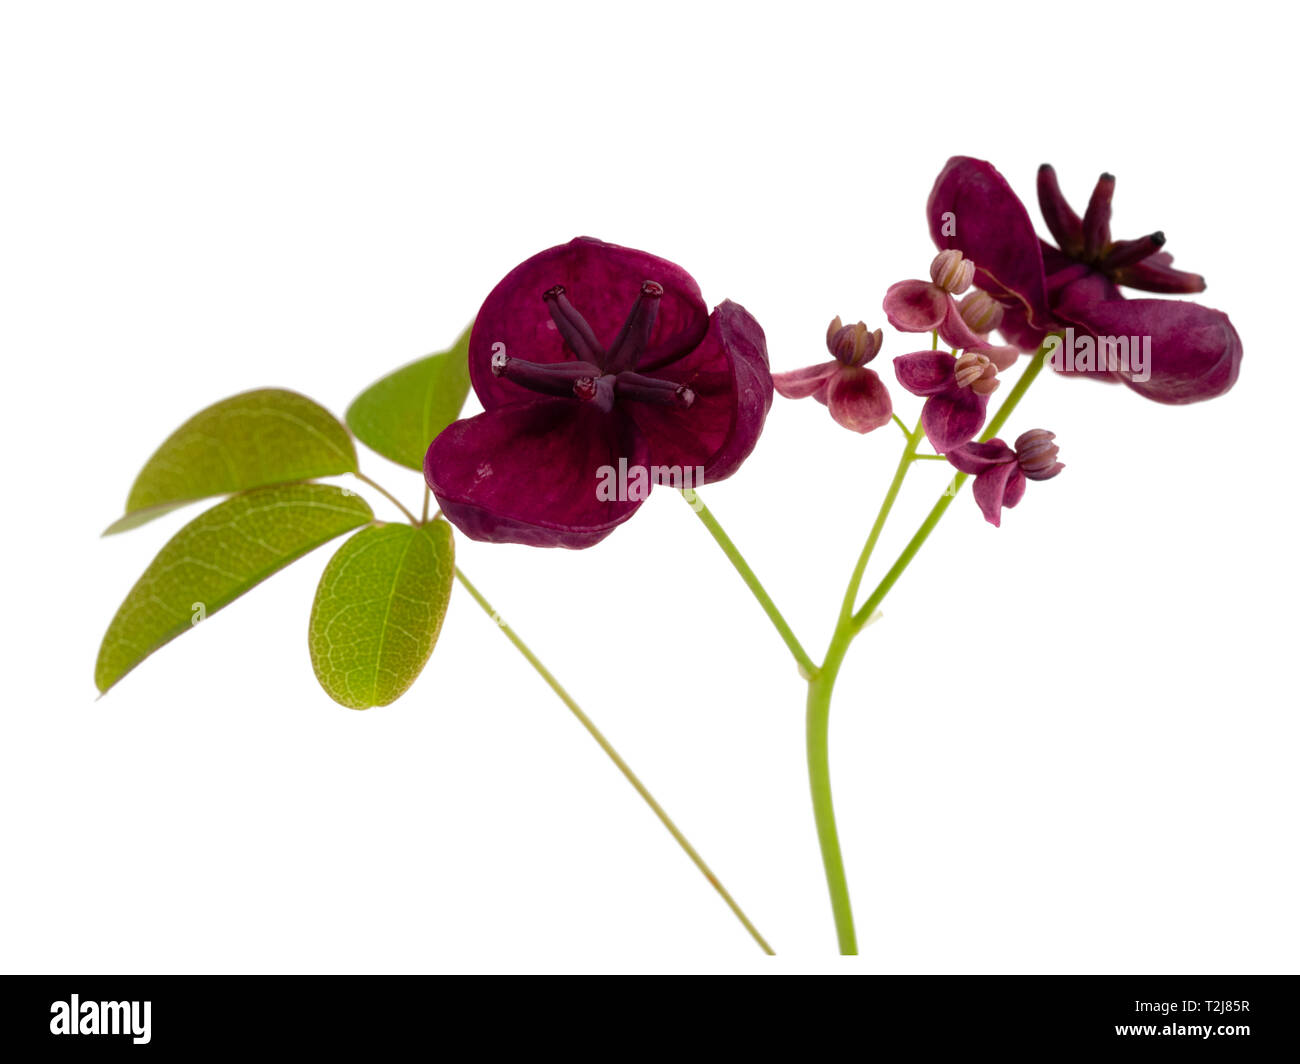 Small male and large female flowers of the chocolate vine, Akebia quinata, isolated on a white background Stock Photo